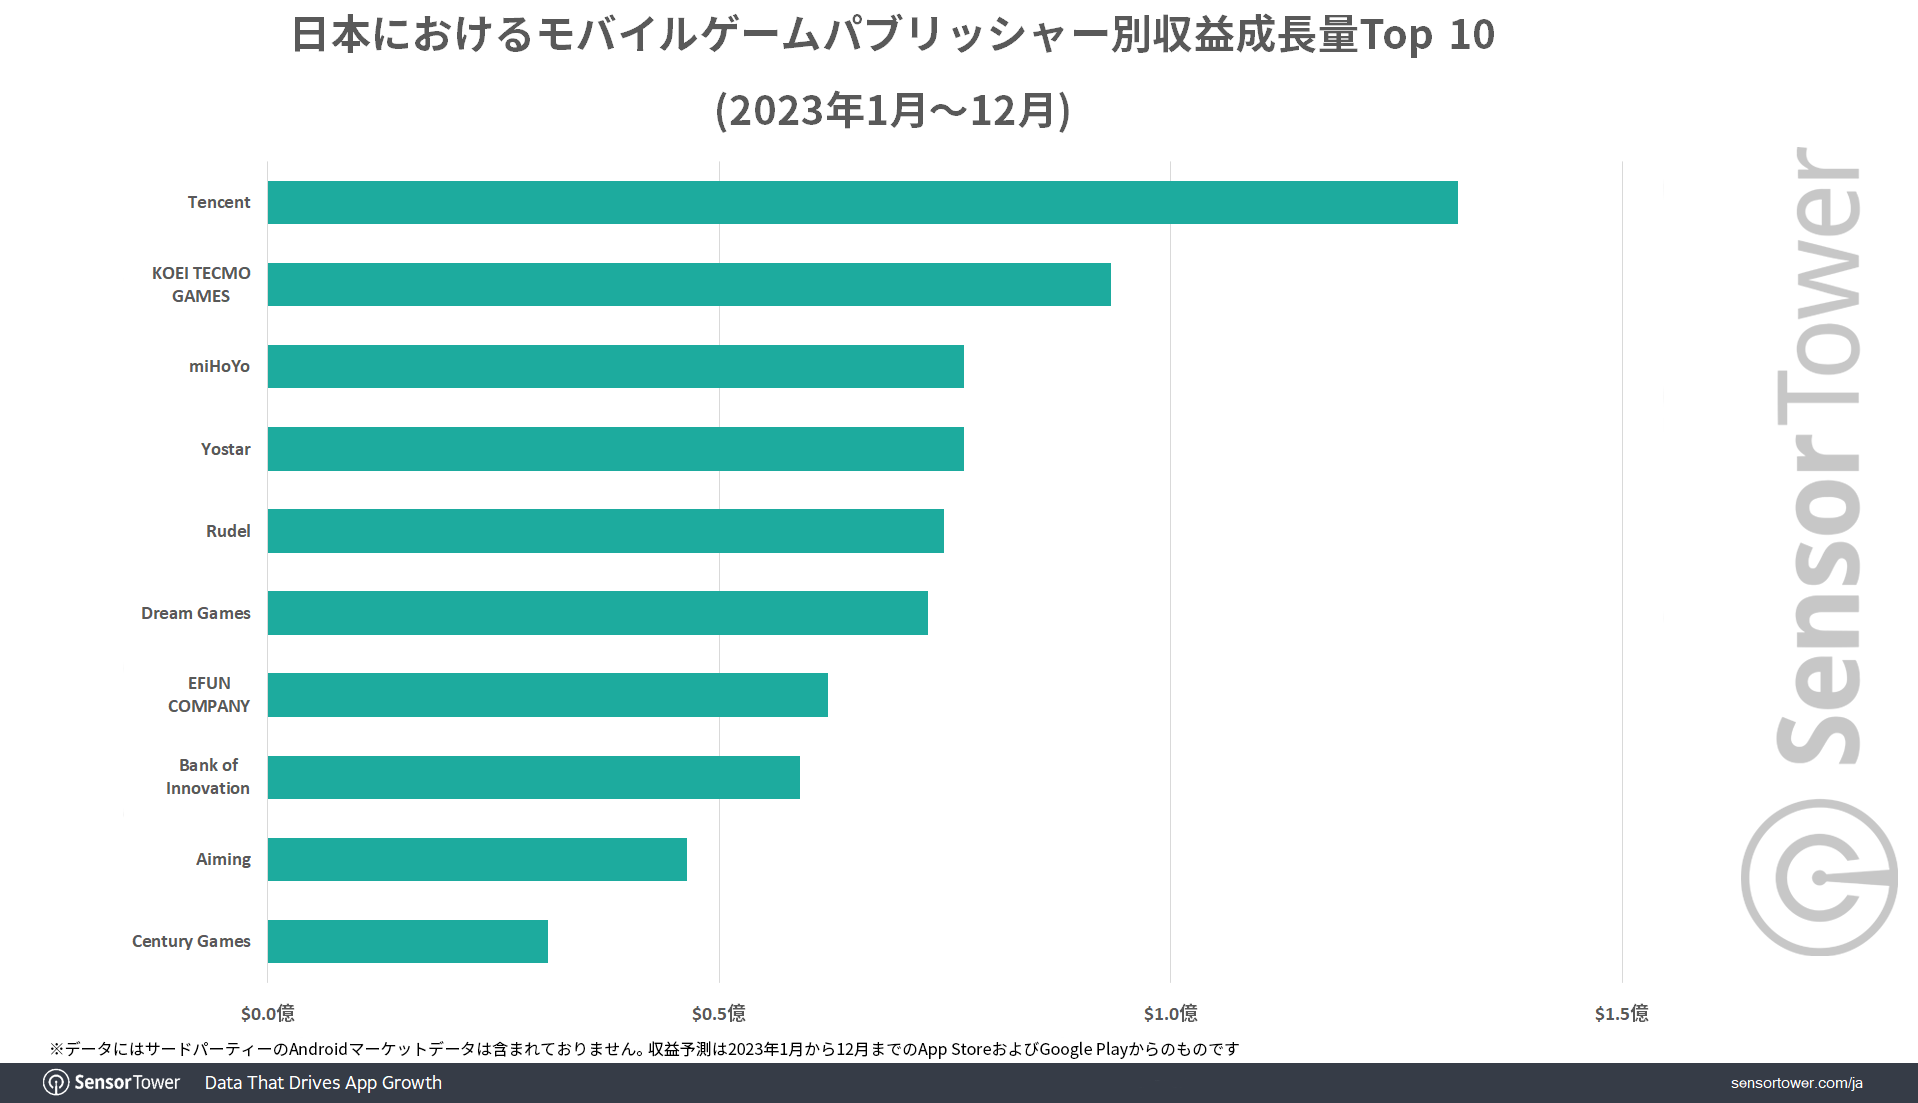 Revenue-Growth-Top-10-by-publisher-Japan